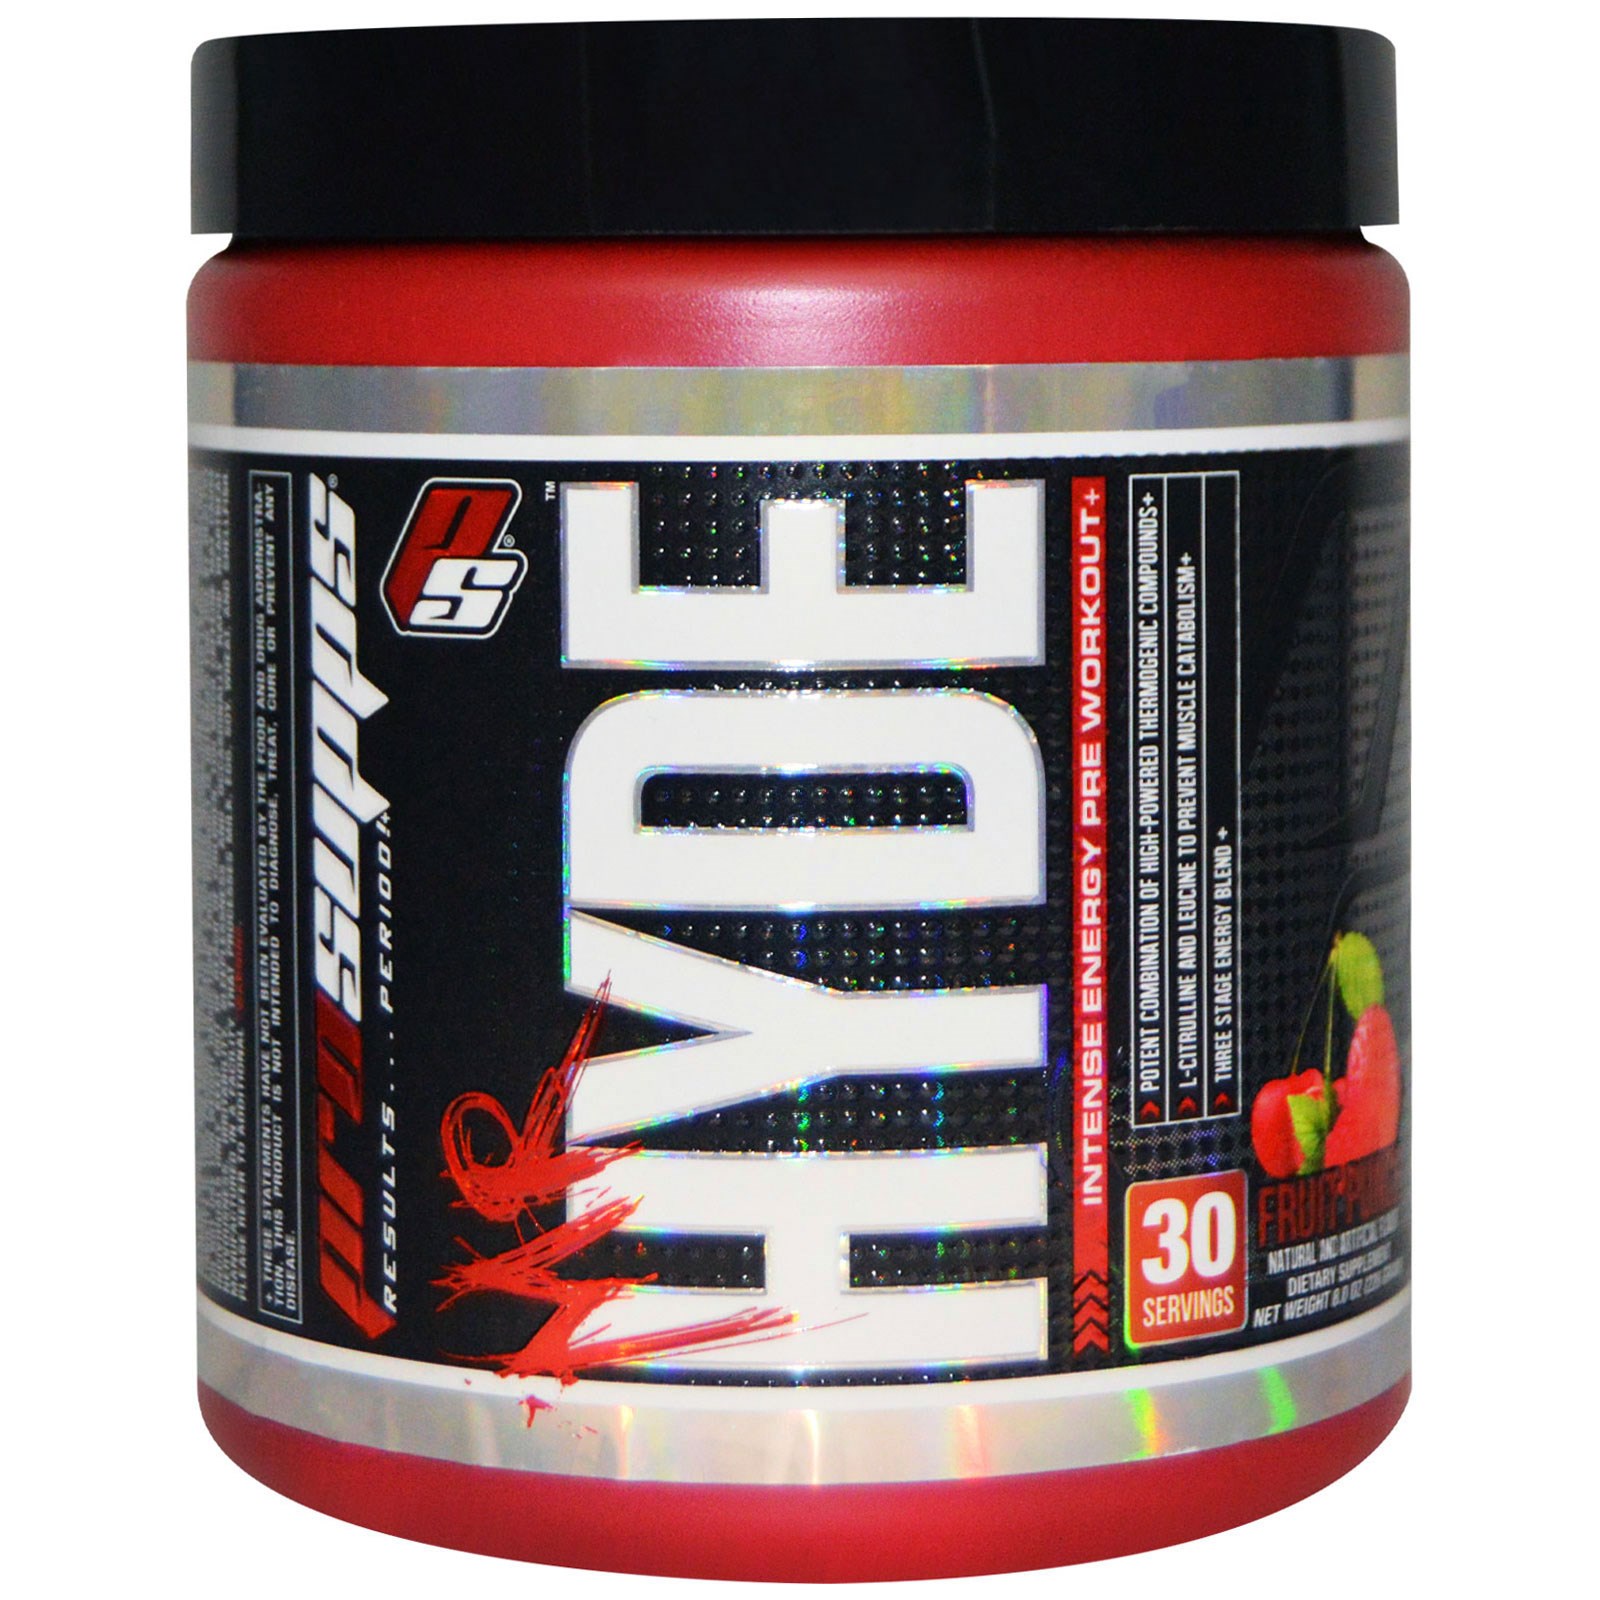 69 Simple Mr hyde pre workout amazon with Machine